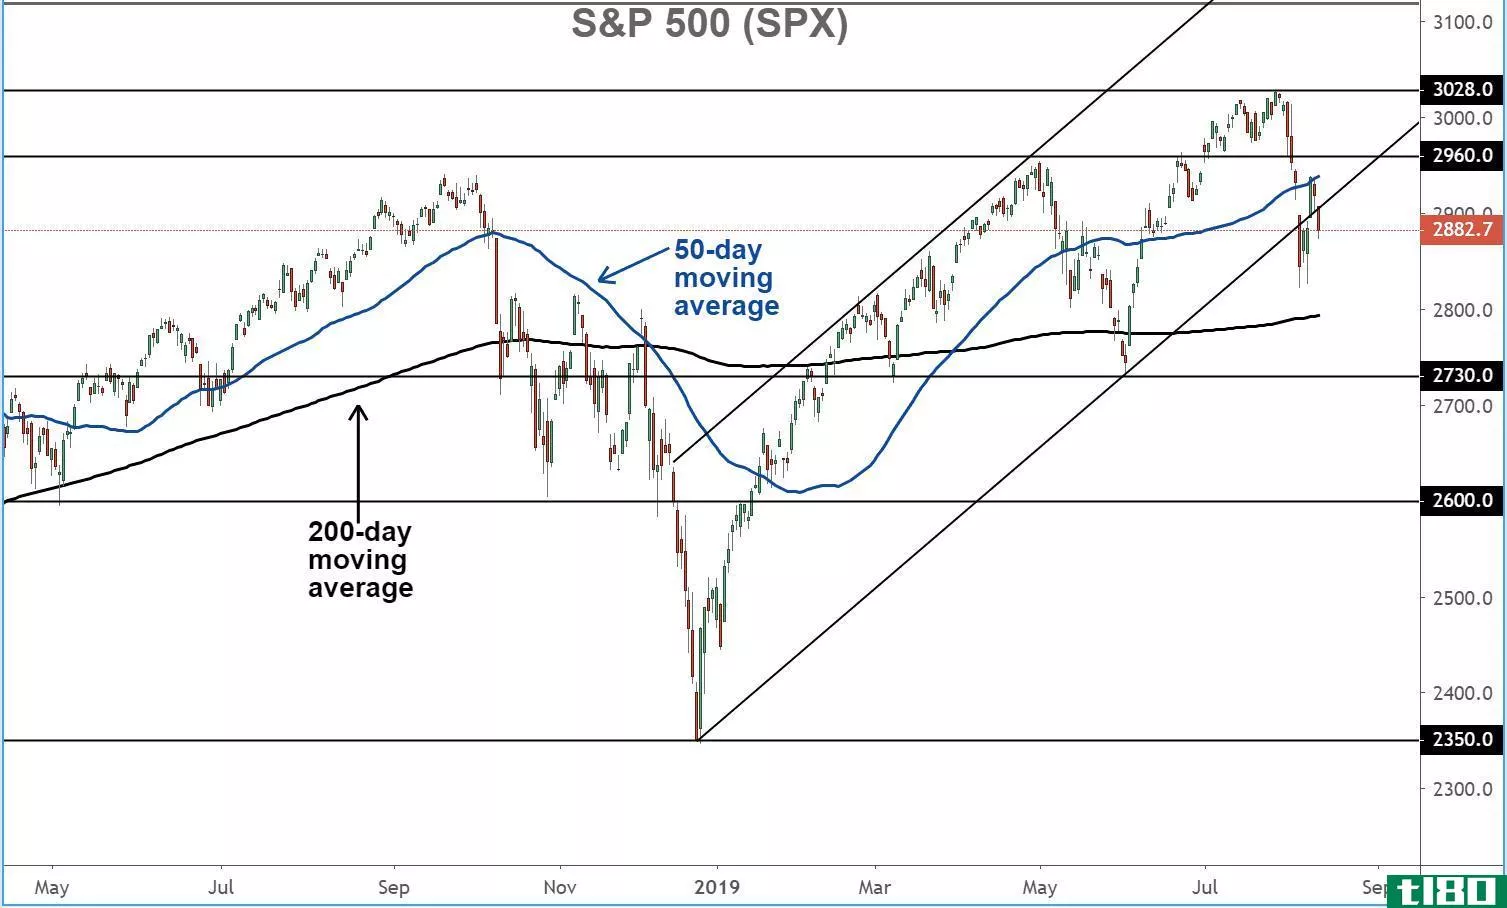 Chart showing the performance of the S&P 500 Index (SPX)